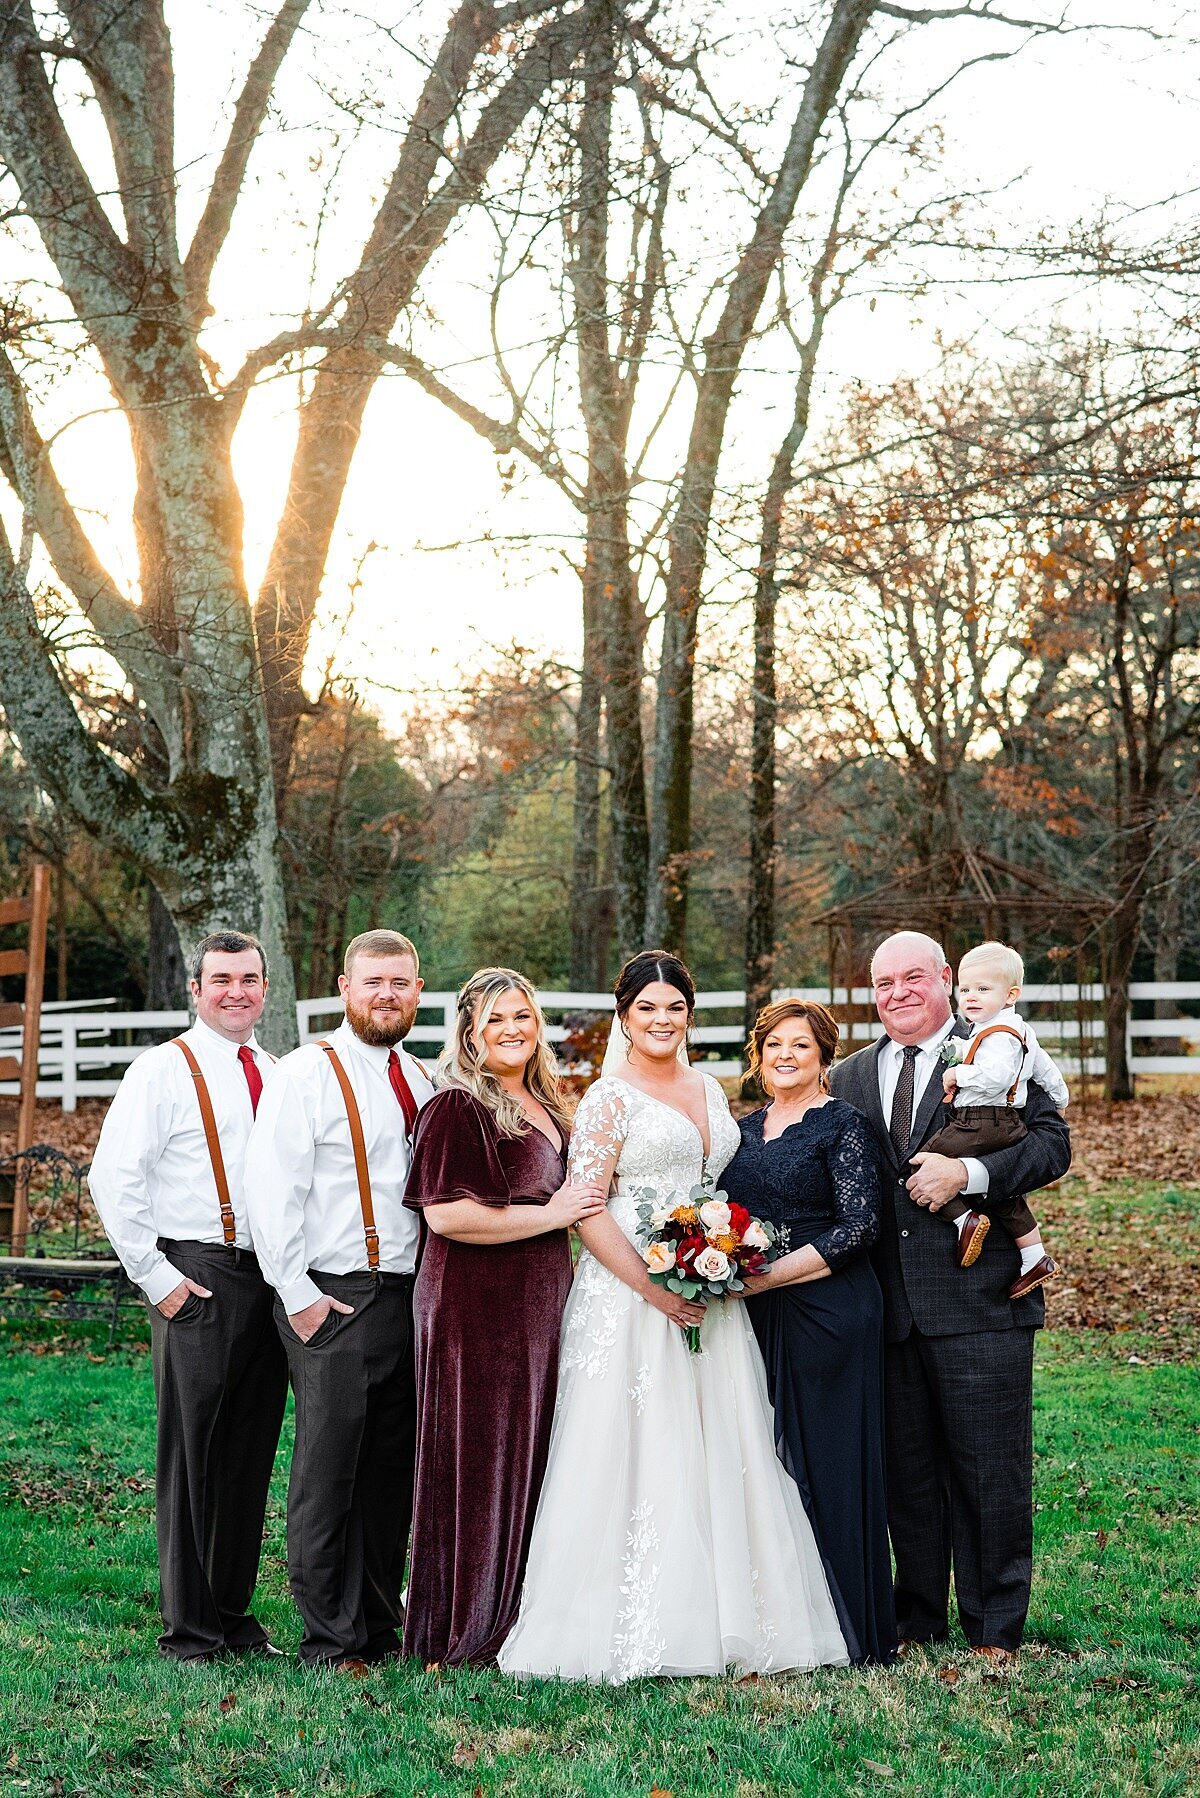 Bride with her family outside for a group portrait on the lawn during golden hour